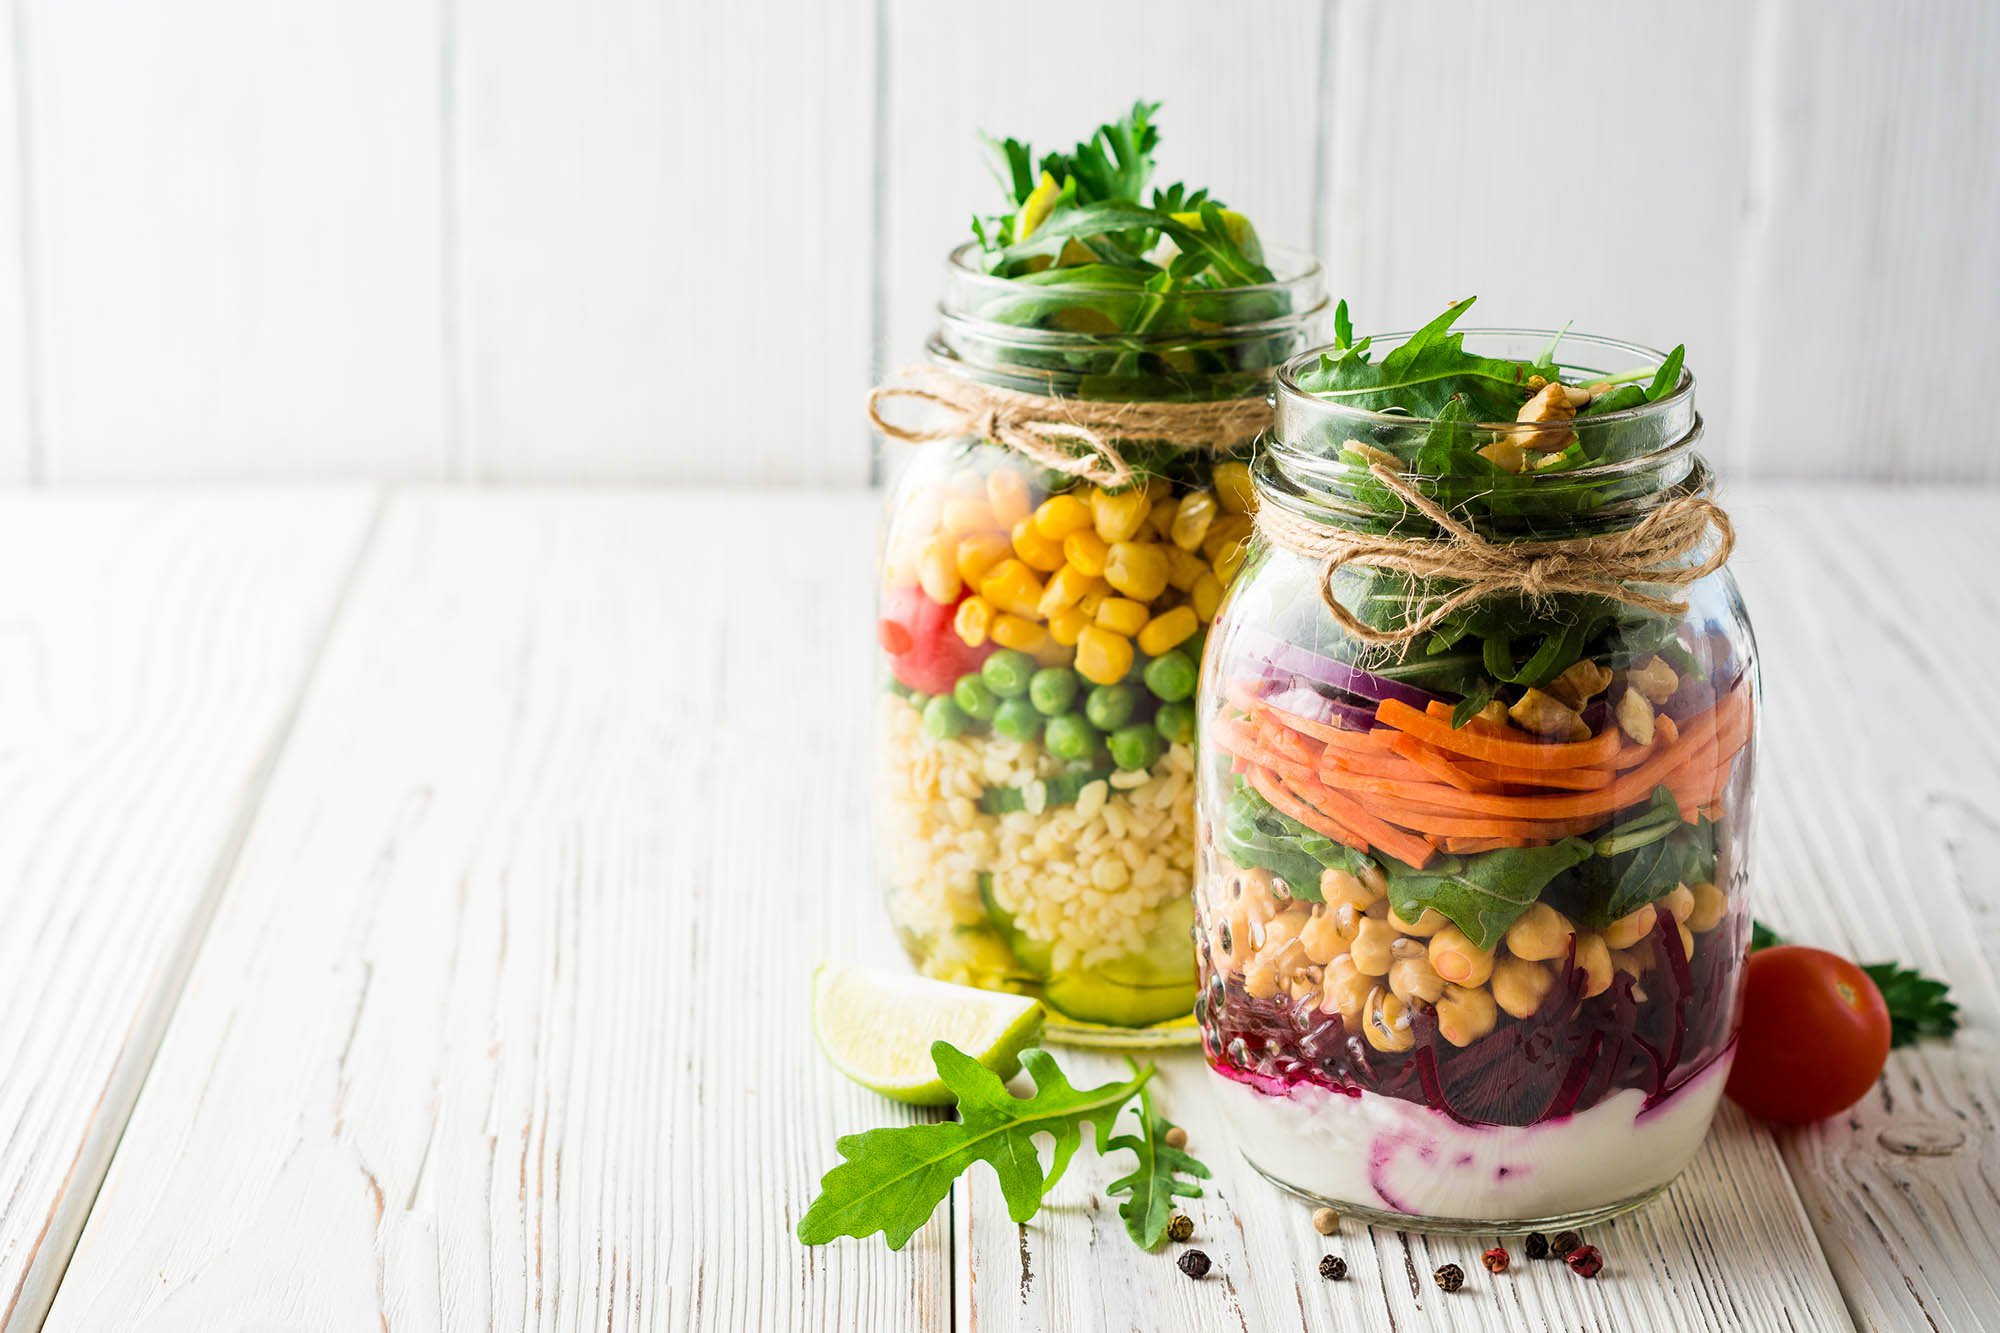 jars with salad ingredients layered inside